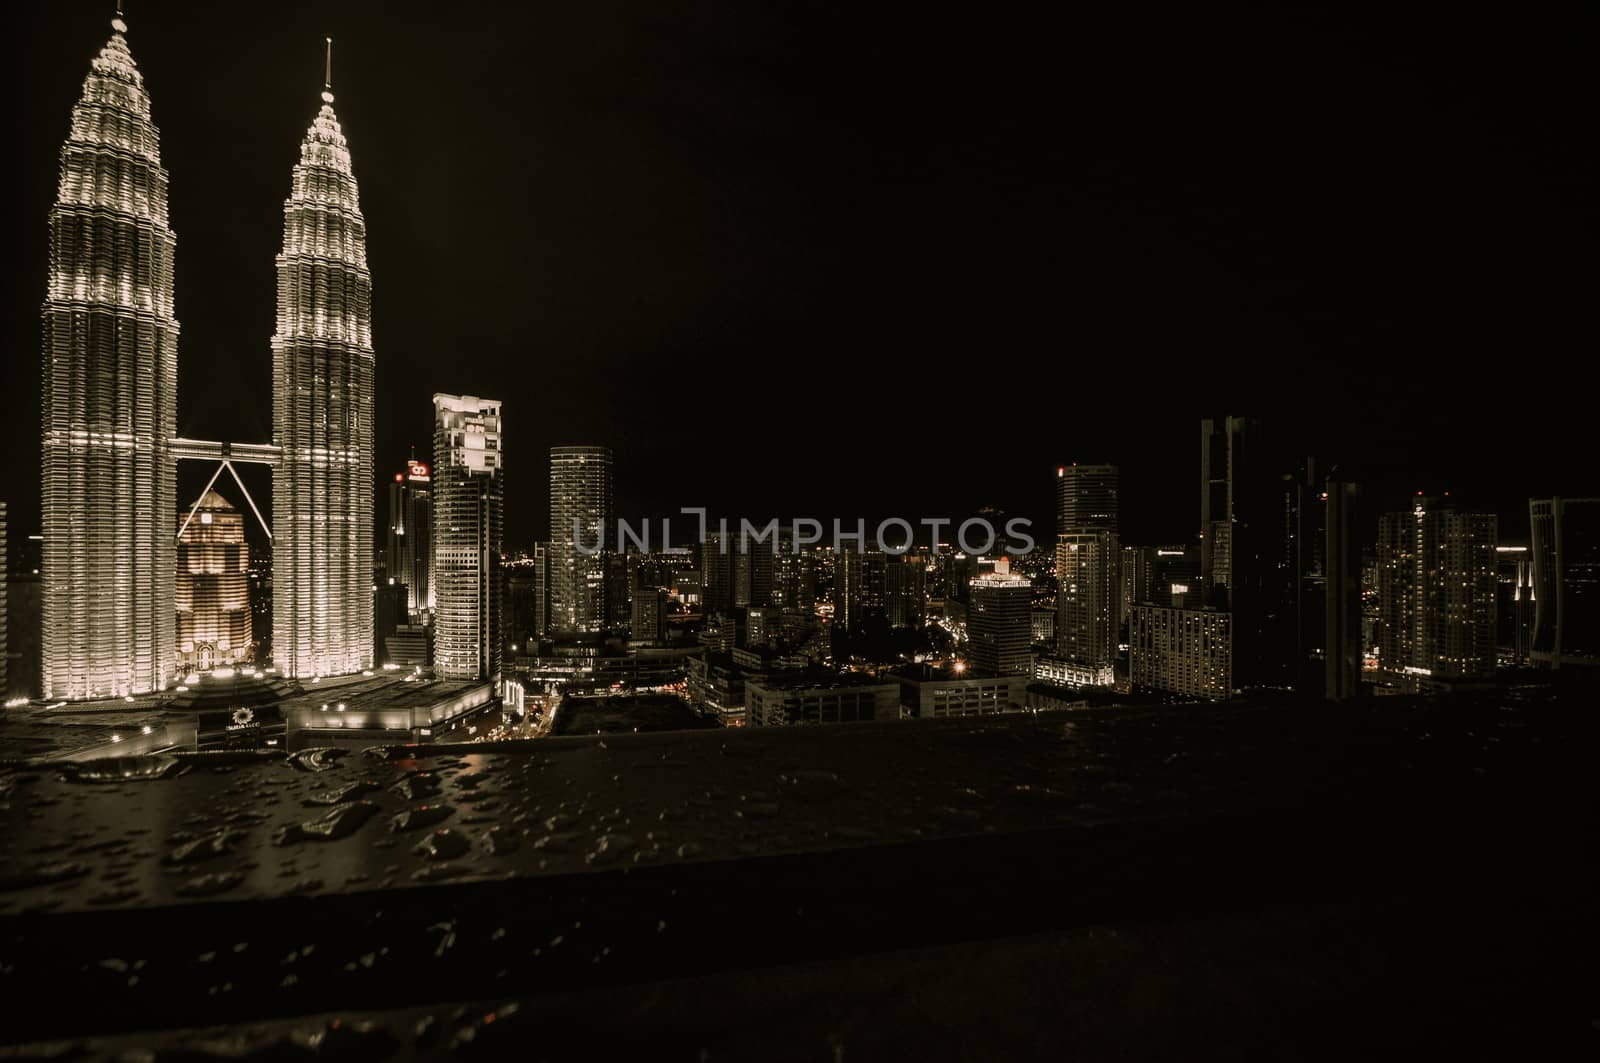 KUALA LUMPUR - APRIL 10: General view of Petronas Twin Towers  at night on Apr 10, 2011 in Kuala Lumpur, Malaysia. The towers are the worlds tallest twin towers with the height of 451.9m.